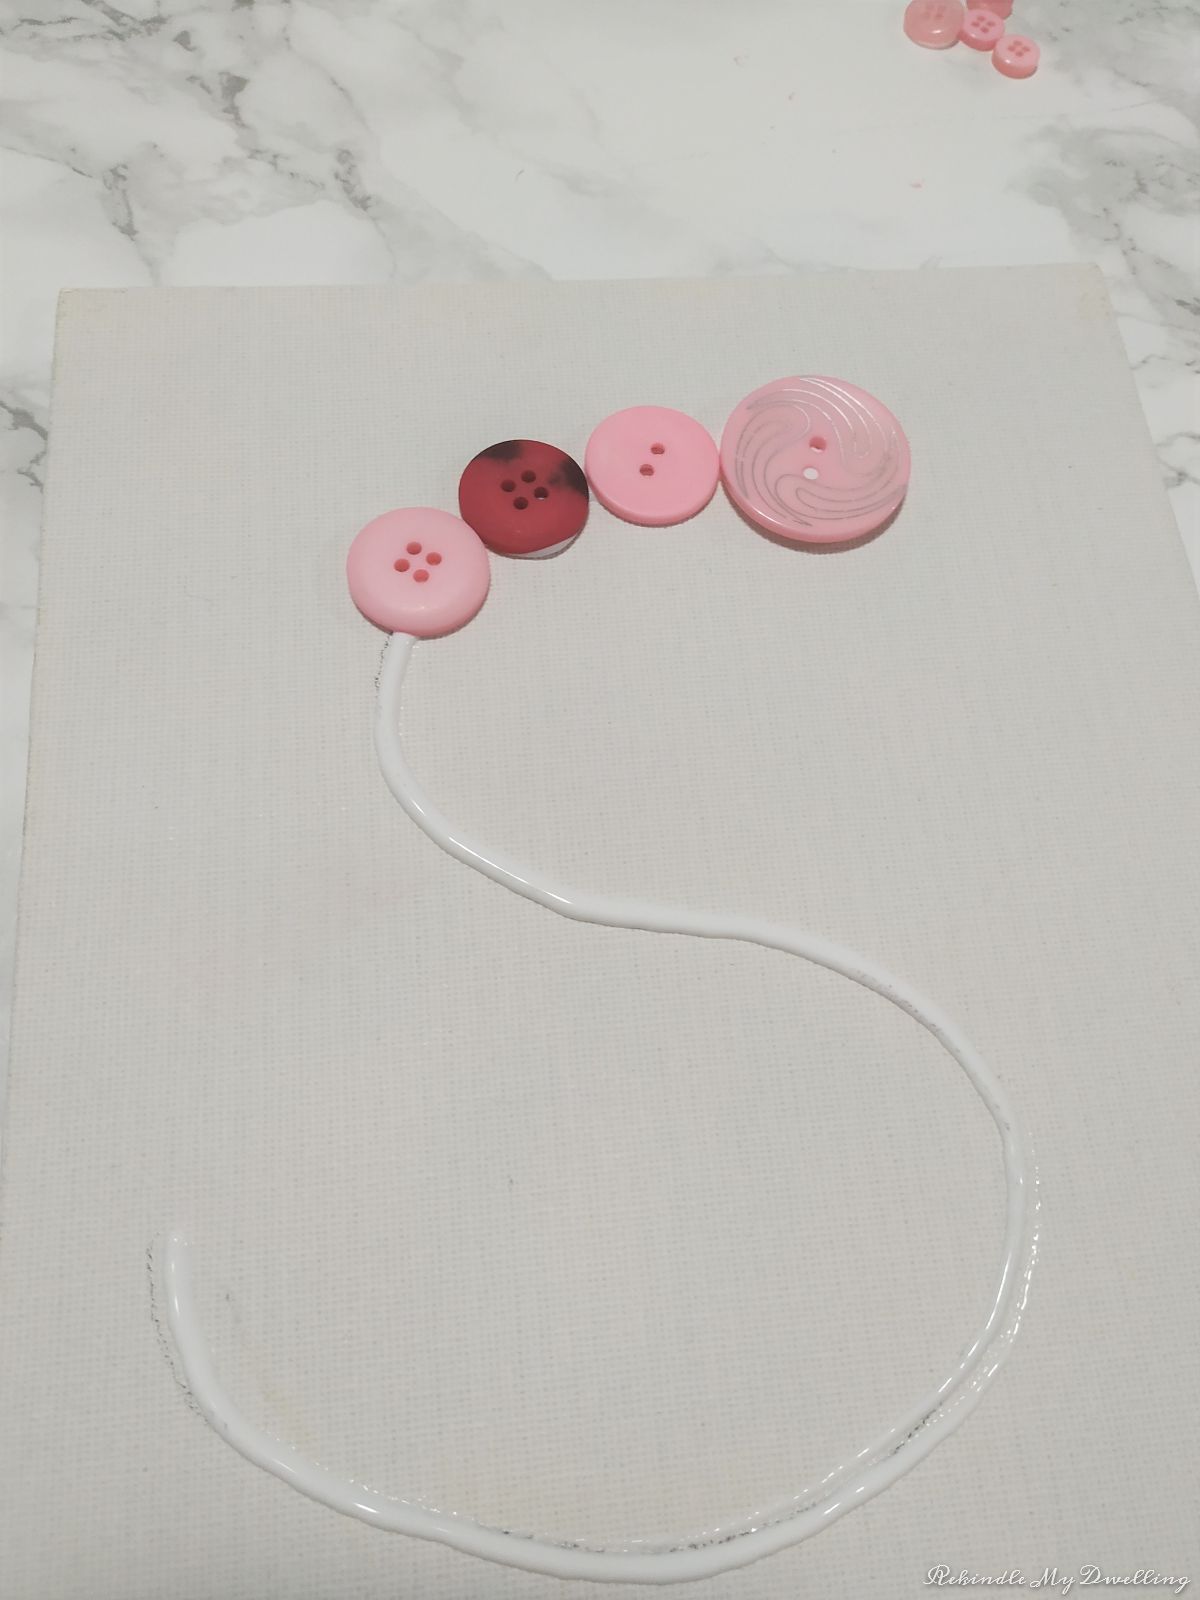 Gluing pink buttons to the canvas.